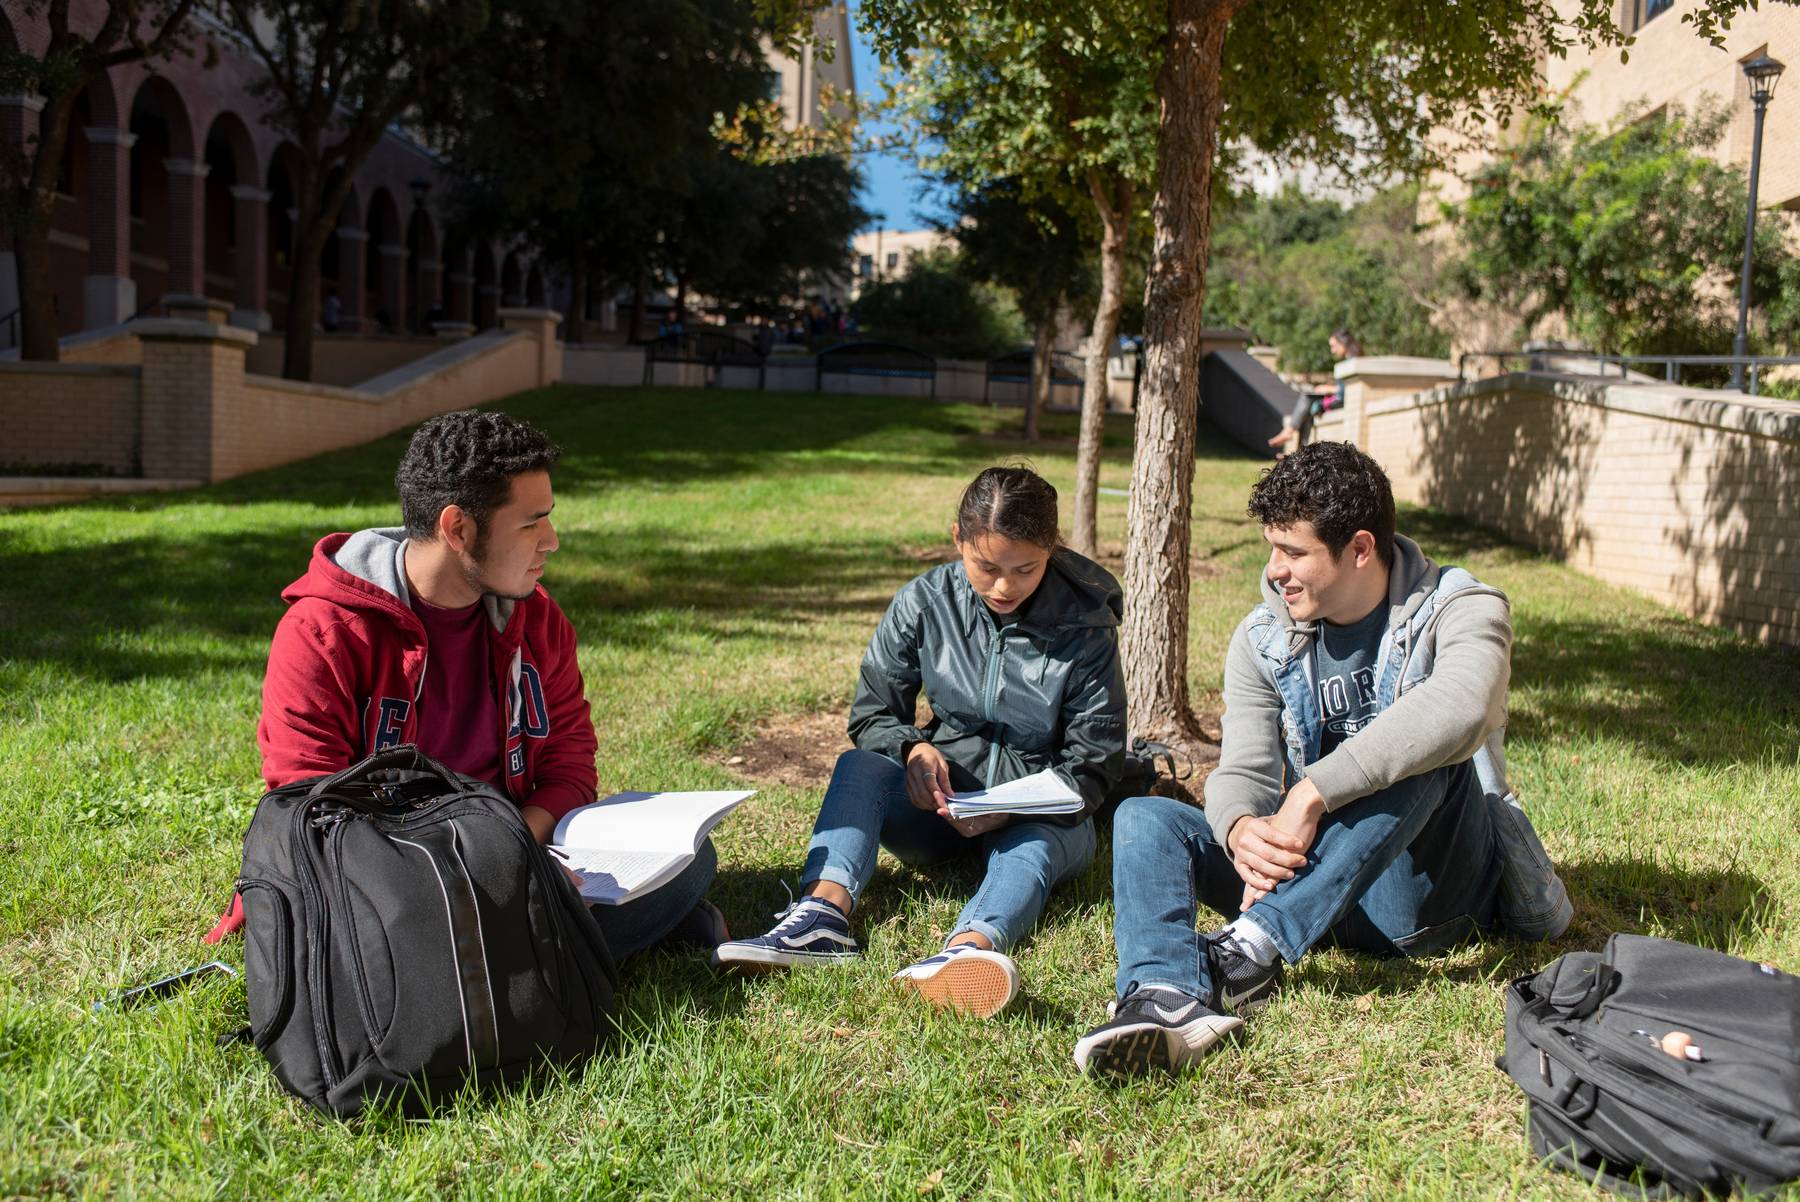 a group of students sit on a grassy area and look at notes together